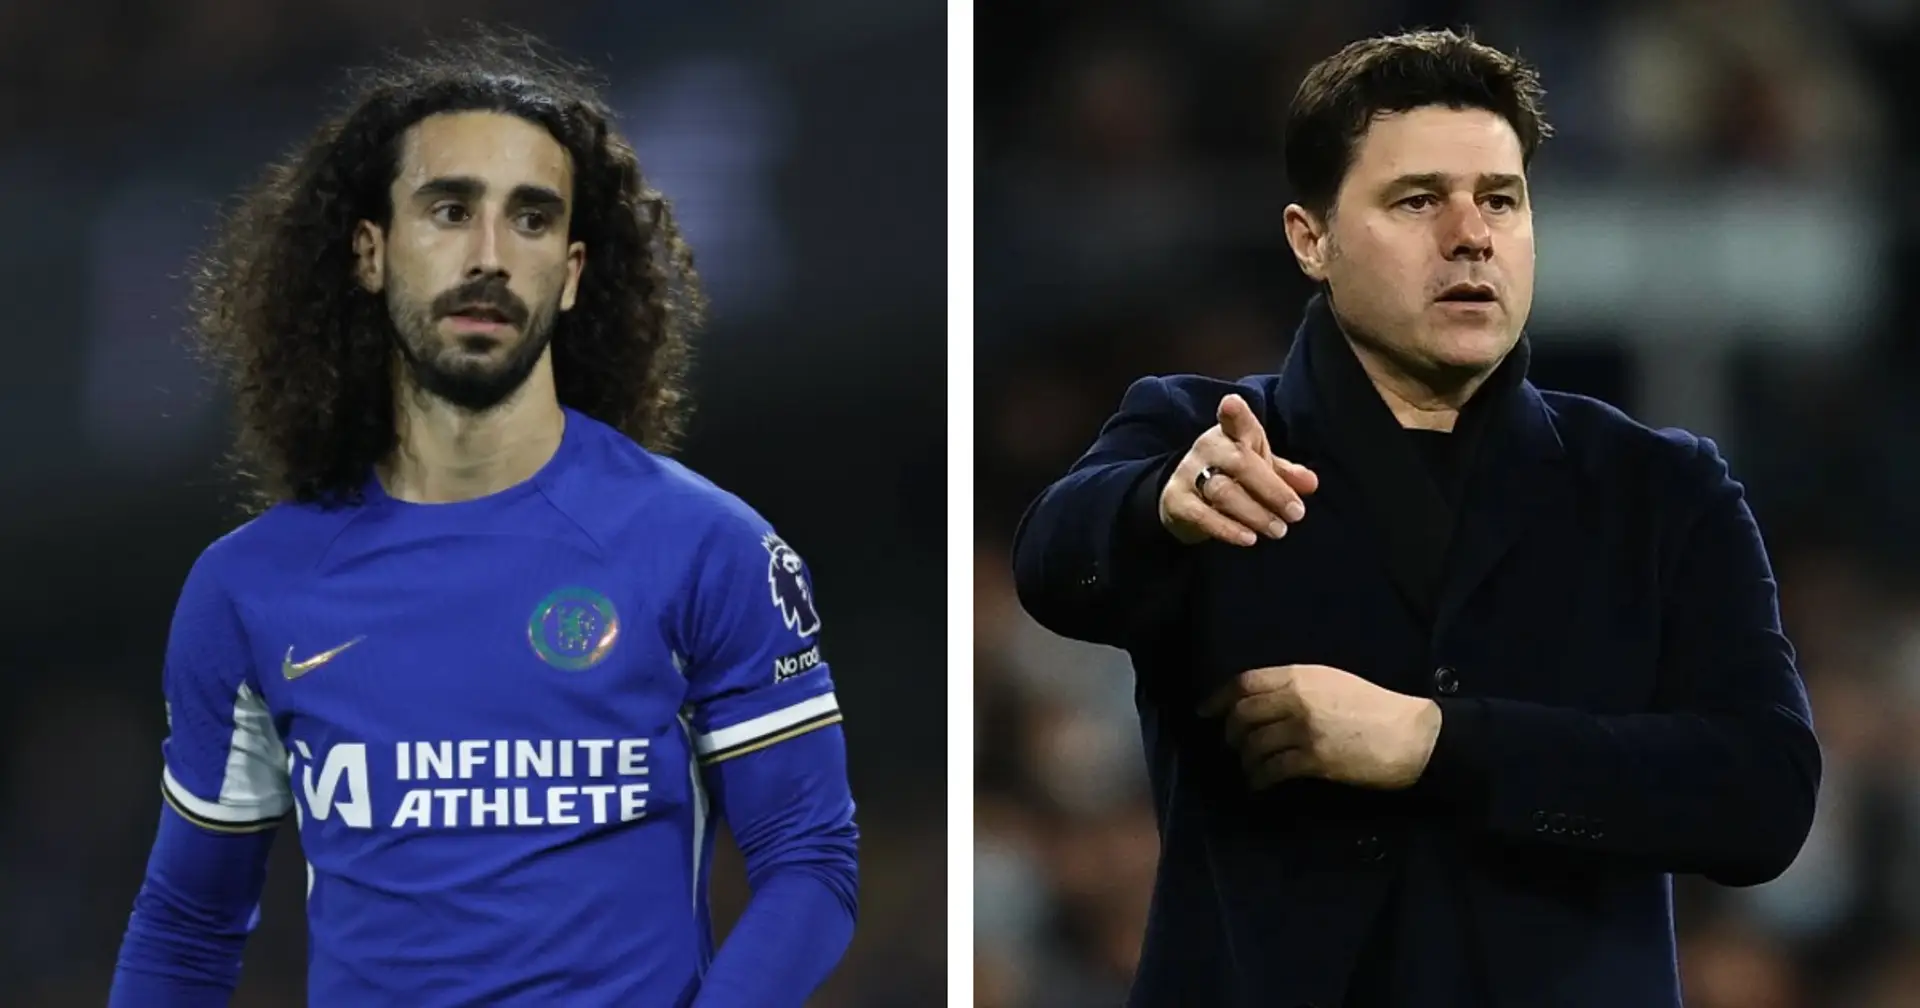 'When we lose 5-0, I don’t think the manager can do anything': Cucurella says players want Pochettino to stay